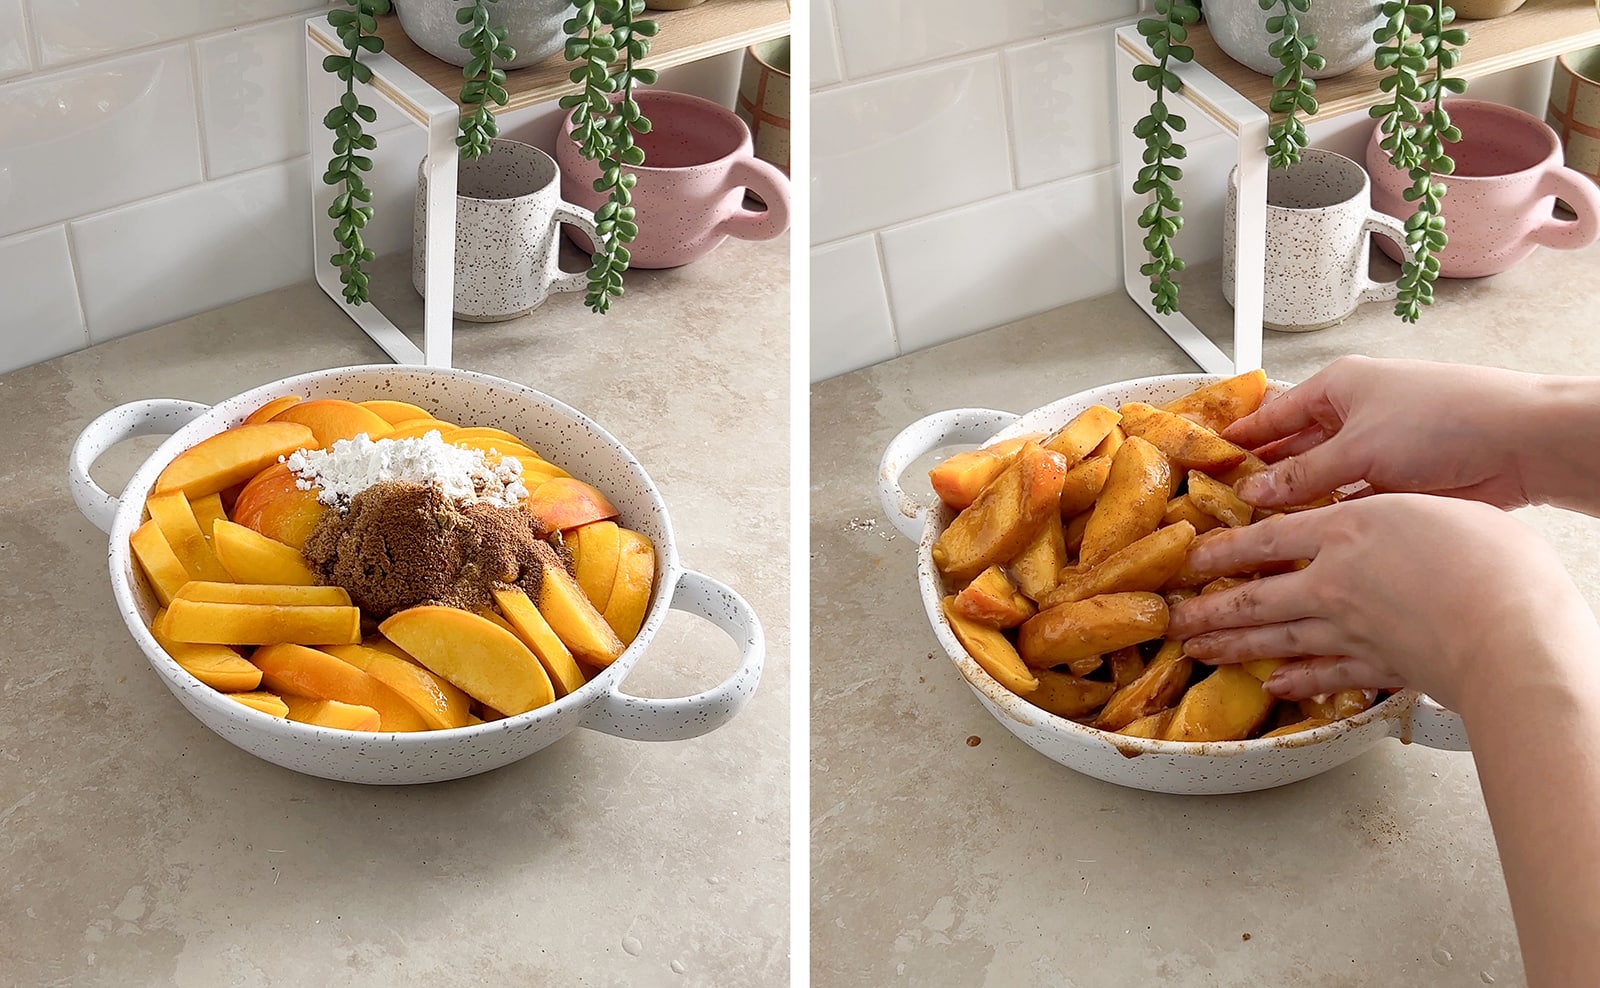 Left to right: peach slices in a baking dish with spices on top, hands mixing peach slices with spices.